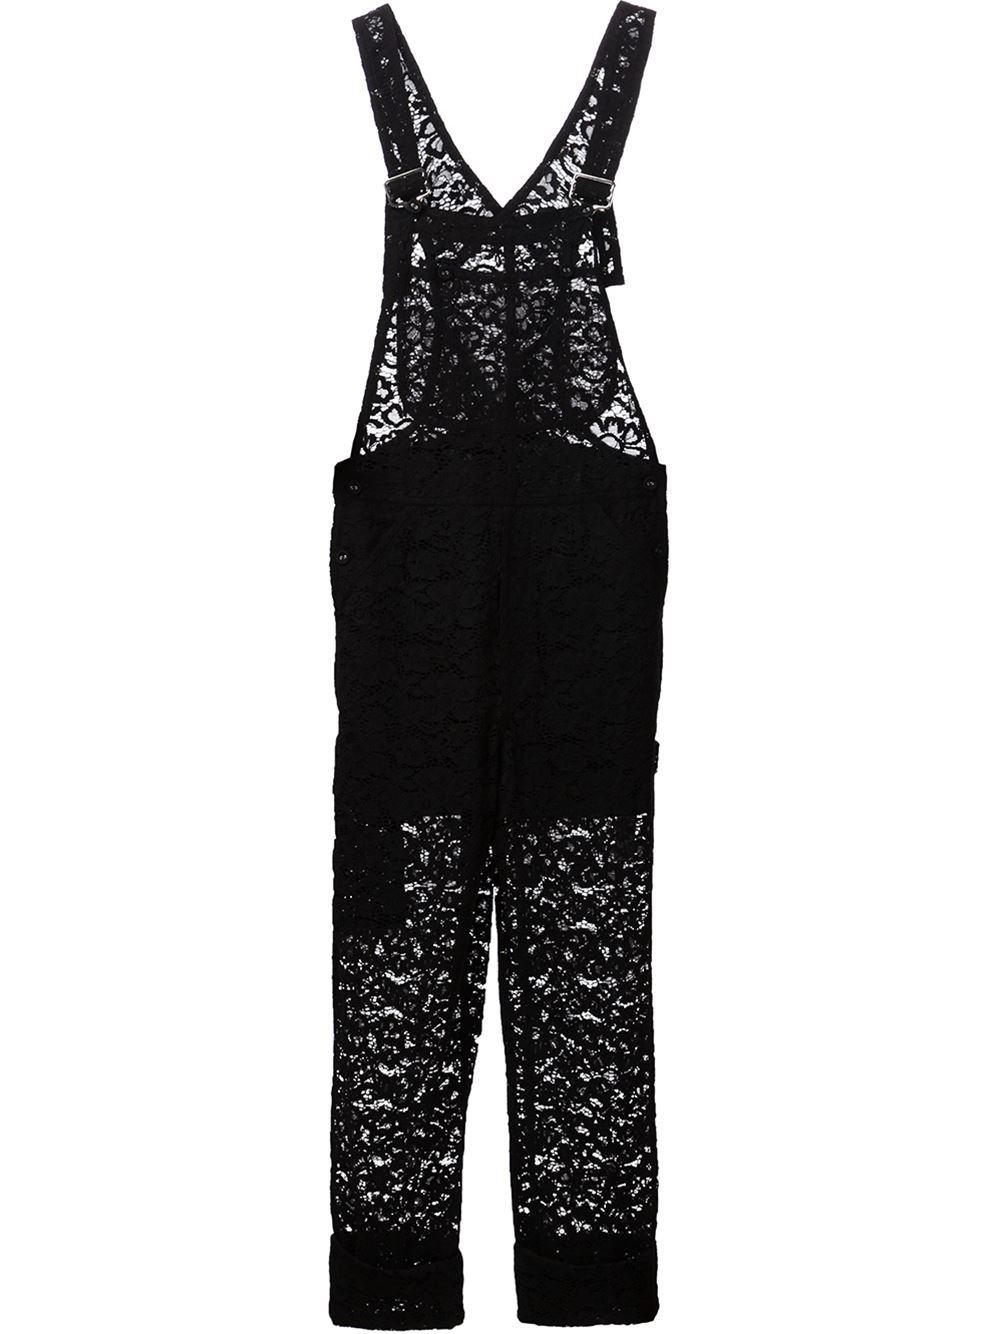 Lyst - Nina Ricci Sheer Lace Overalls in Black